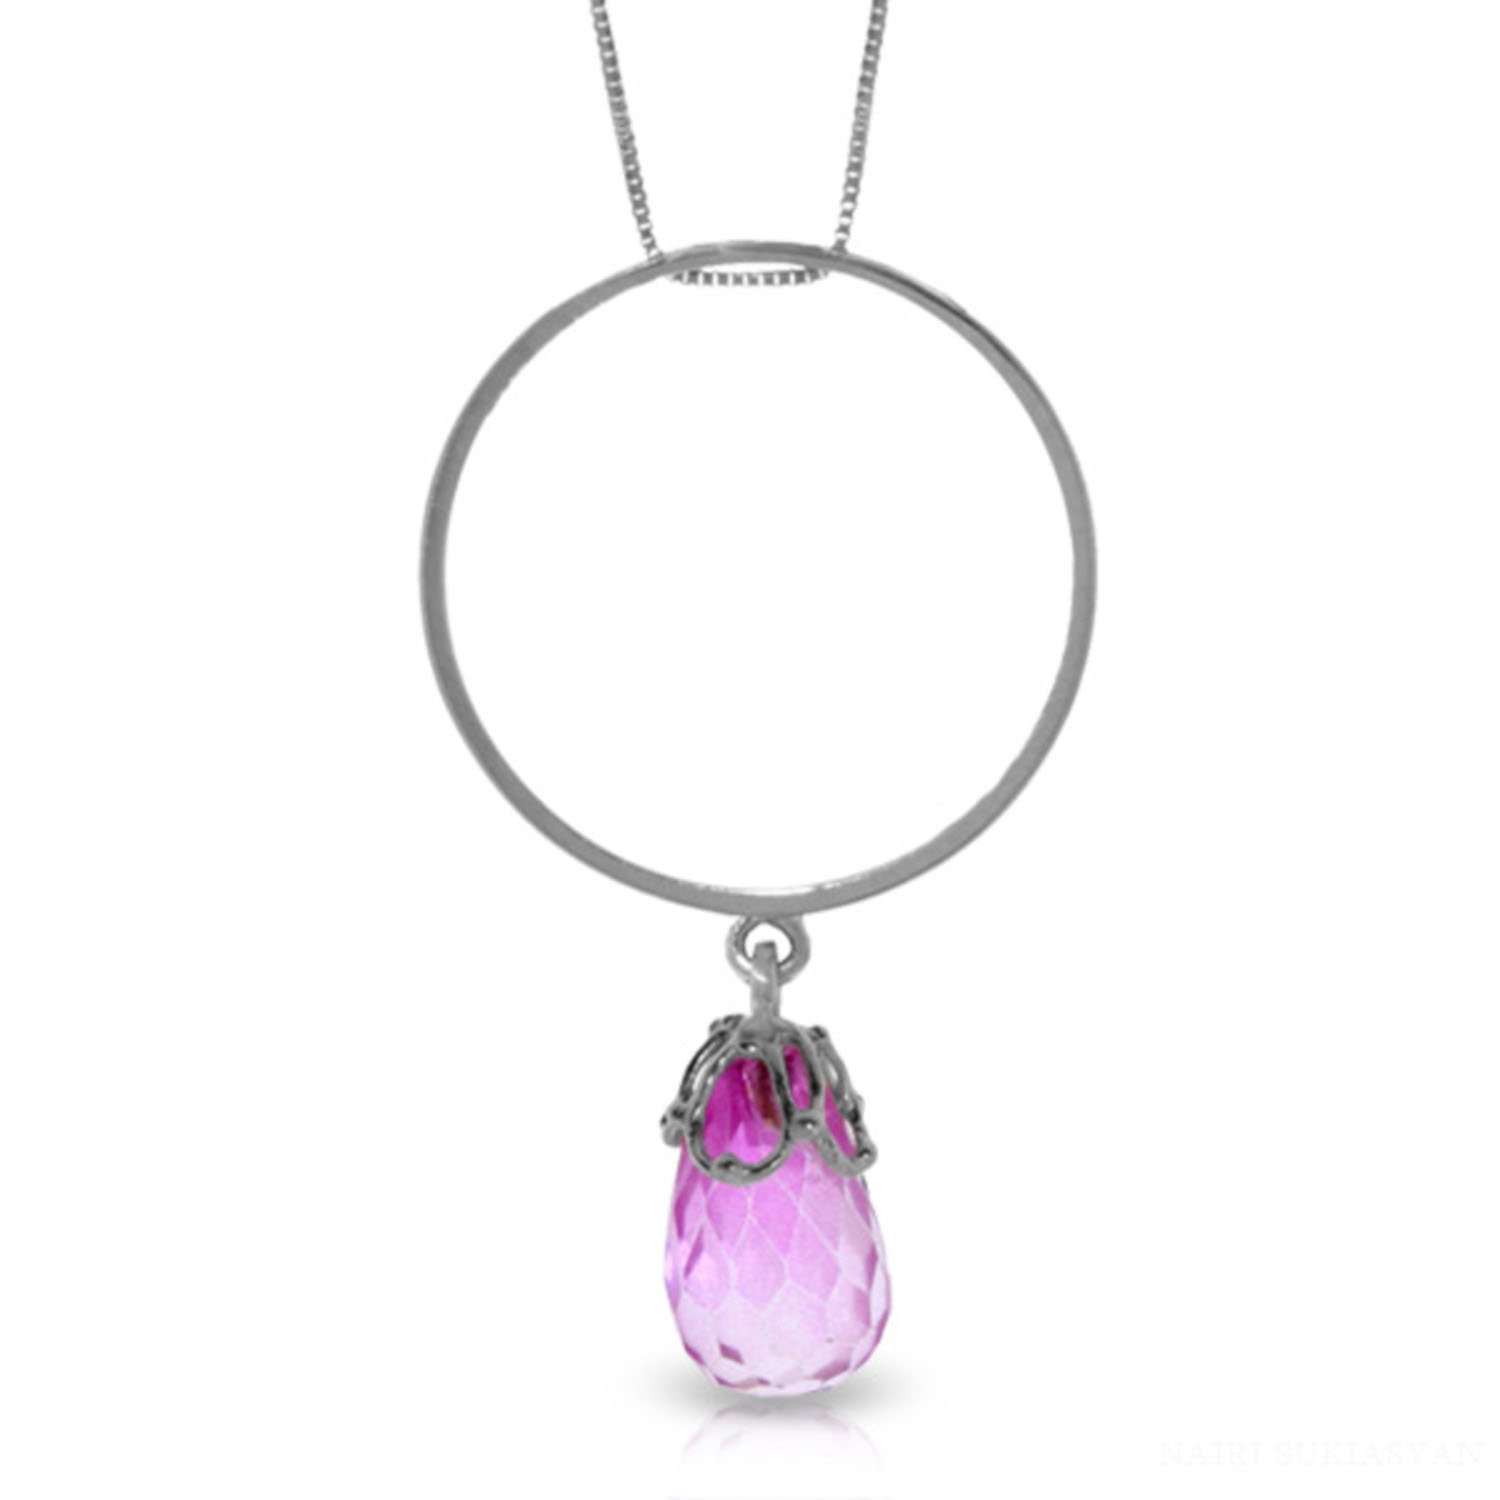 Galaxy Gold 3 Carat 14k 16" Solid White Gold Necklace with Natural Pink Topaz Charm Circle Pendant - image 1 of 2